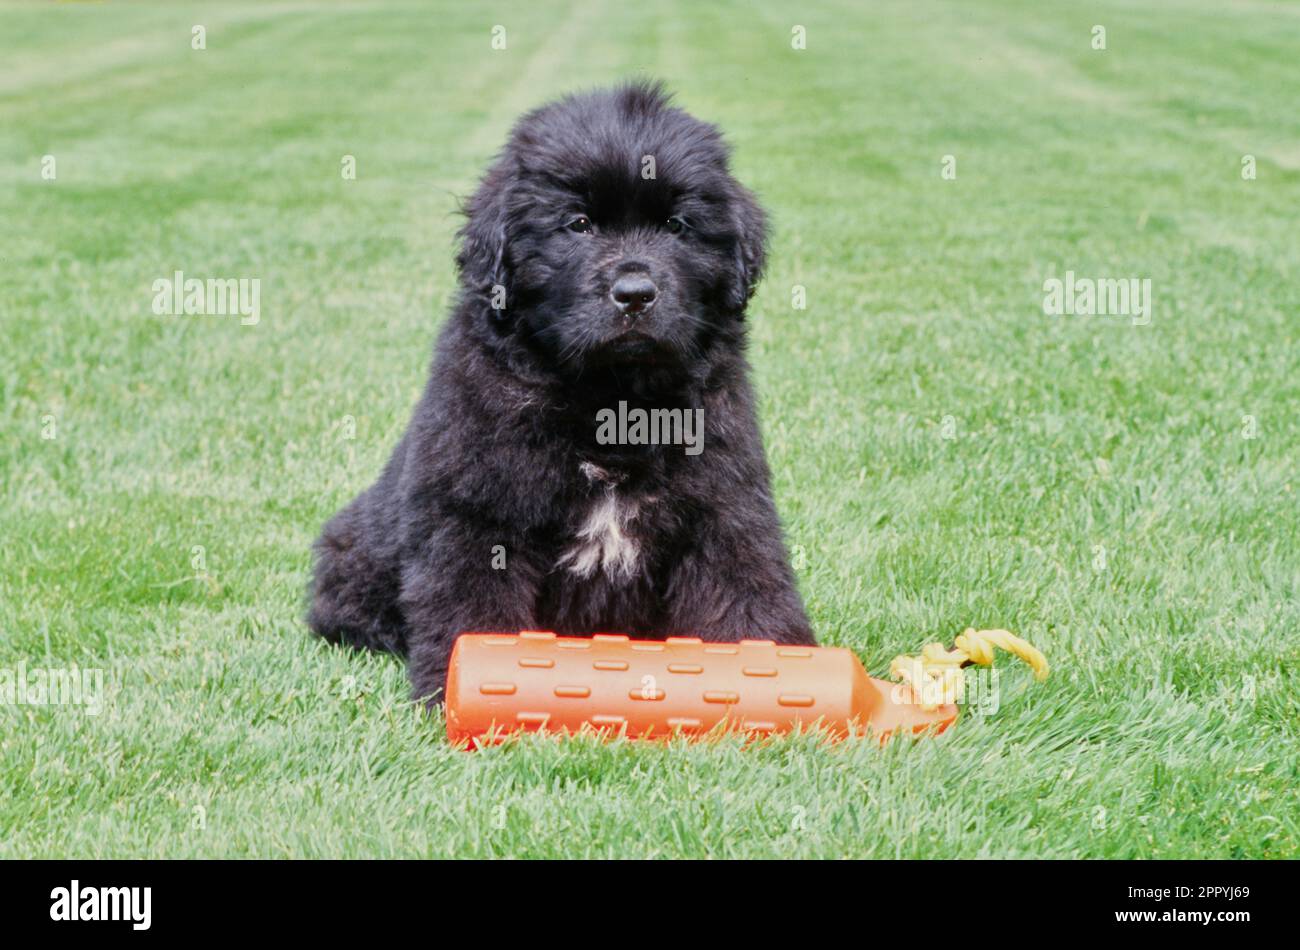 Fluffy Newfoundland puppy sitting on lawn with red floating toy Stock Photo